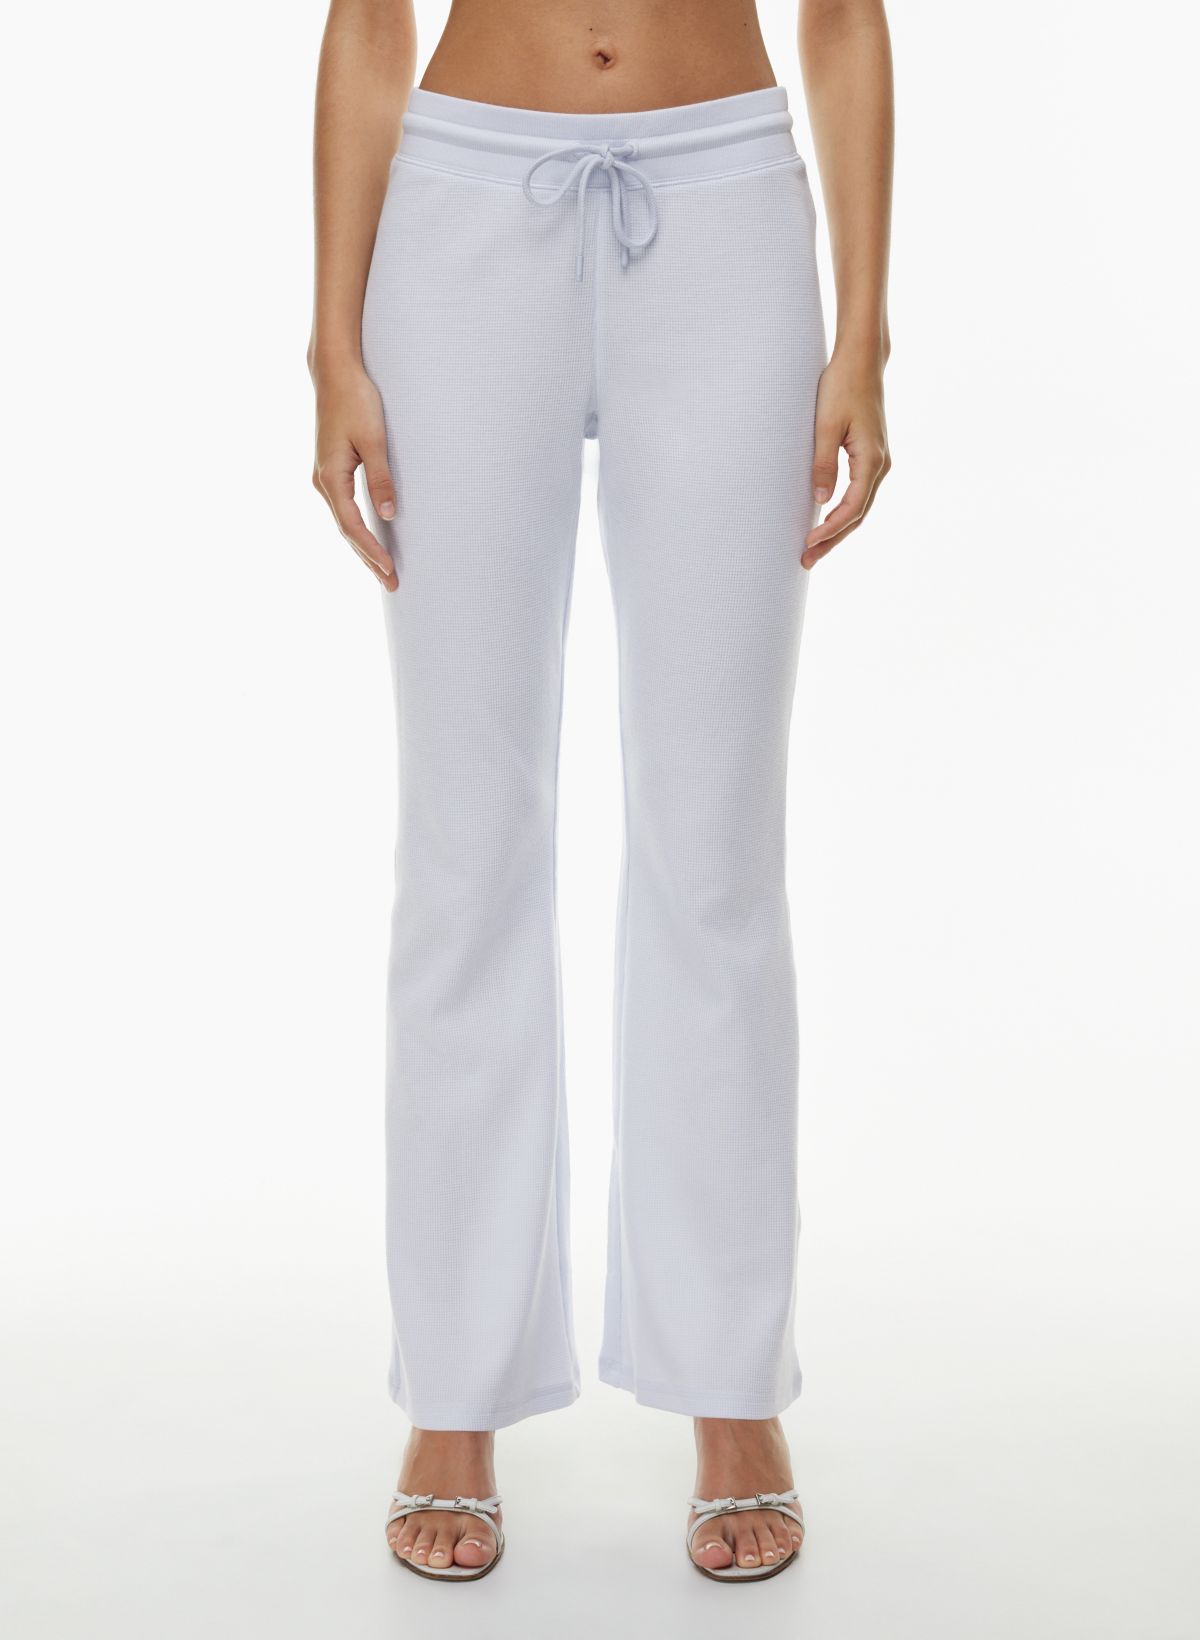 Aerie Waffle High Waisted Flare Pant by Ultra-soft, textured